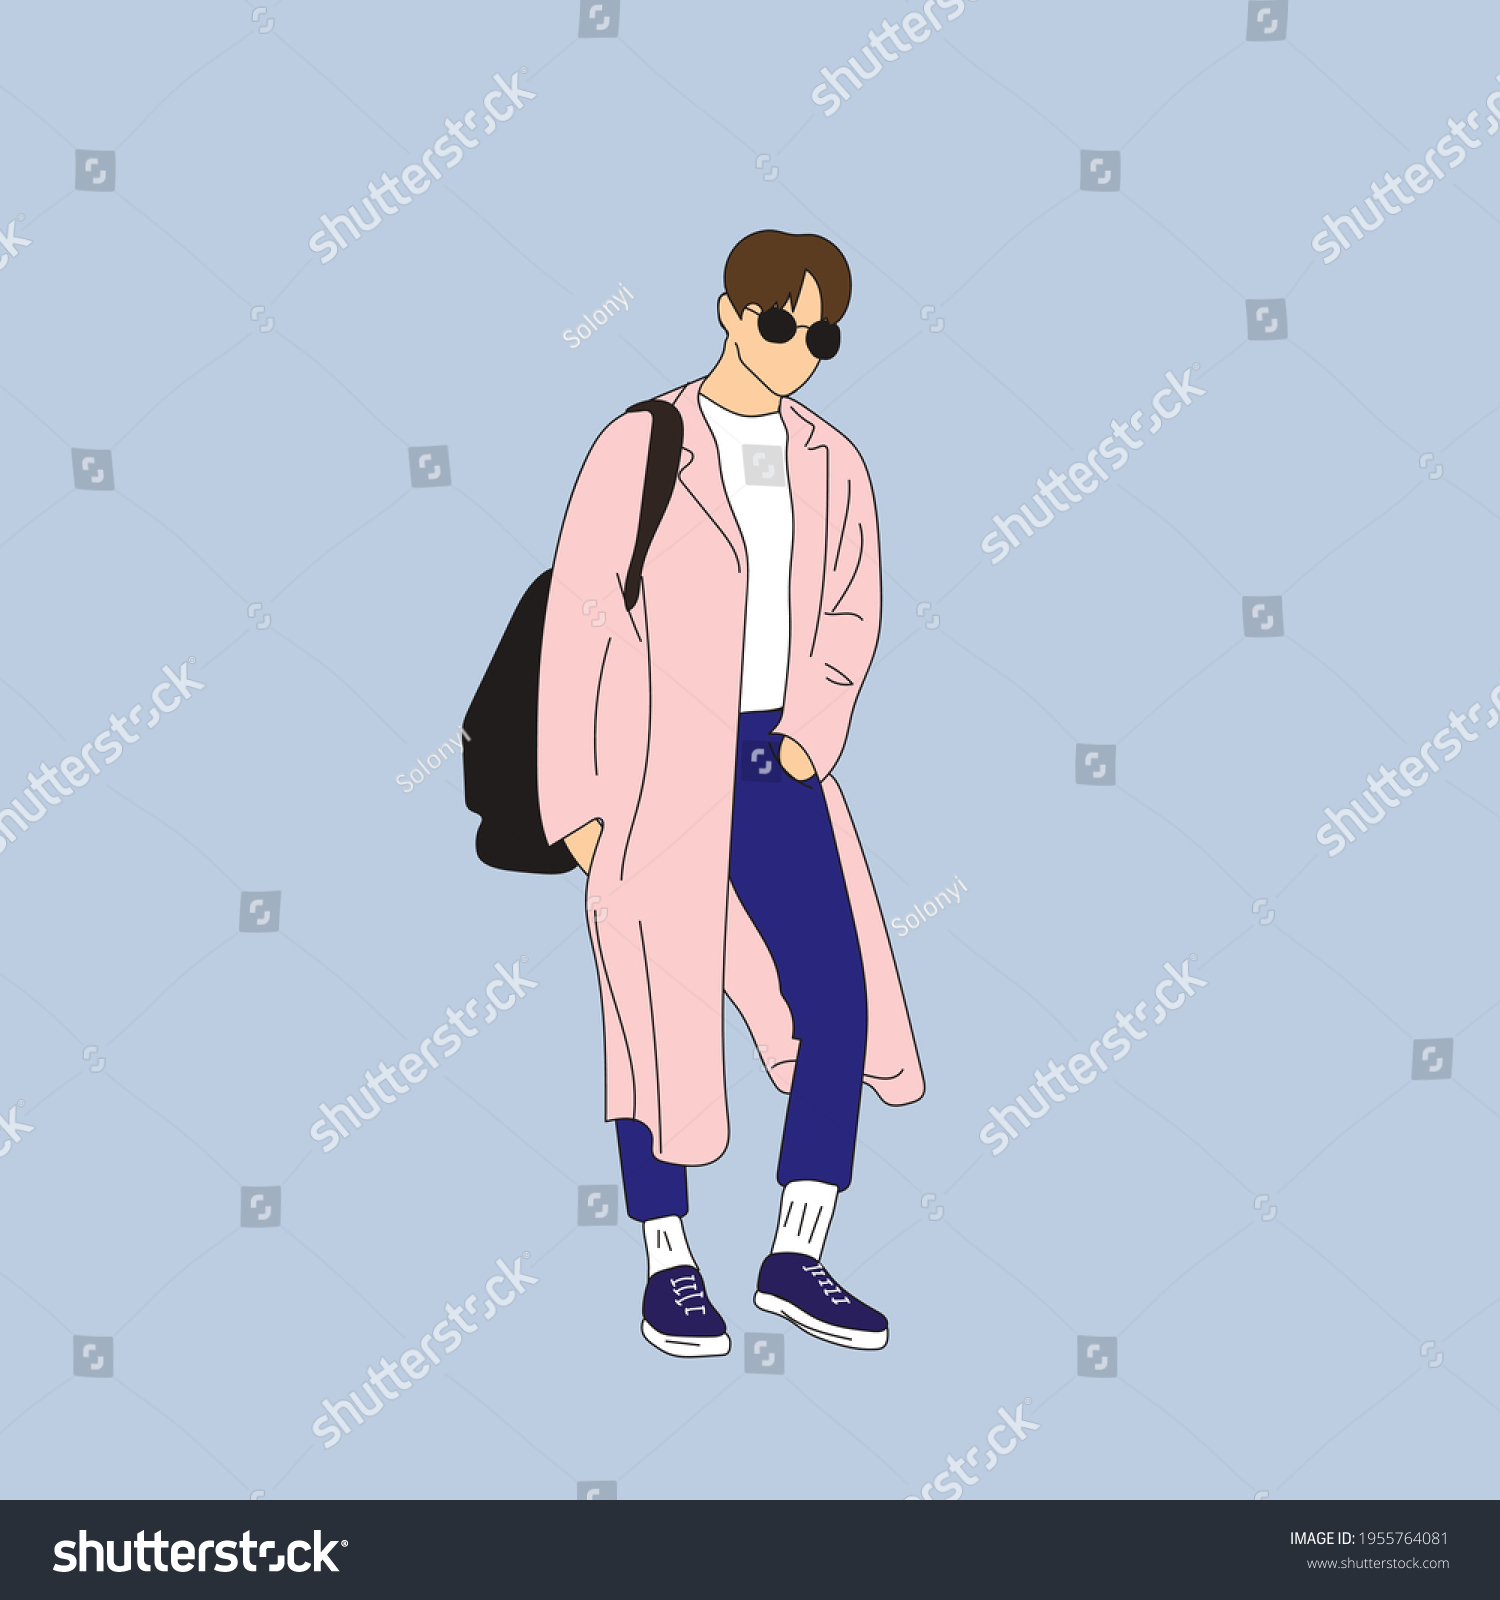 SVG of Vector illustration of Kpop street fashion. Street idols of Koreans. Kpop male idol fashion. A guy in blue jeans and a pink raincoat.	 svg